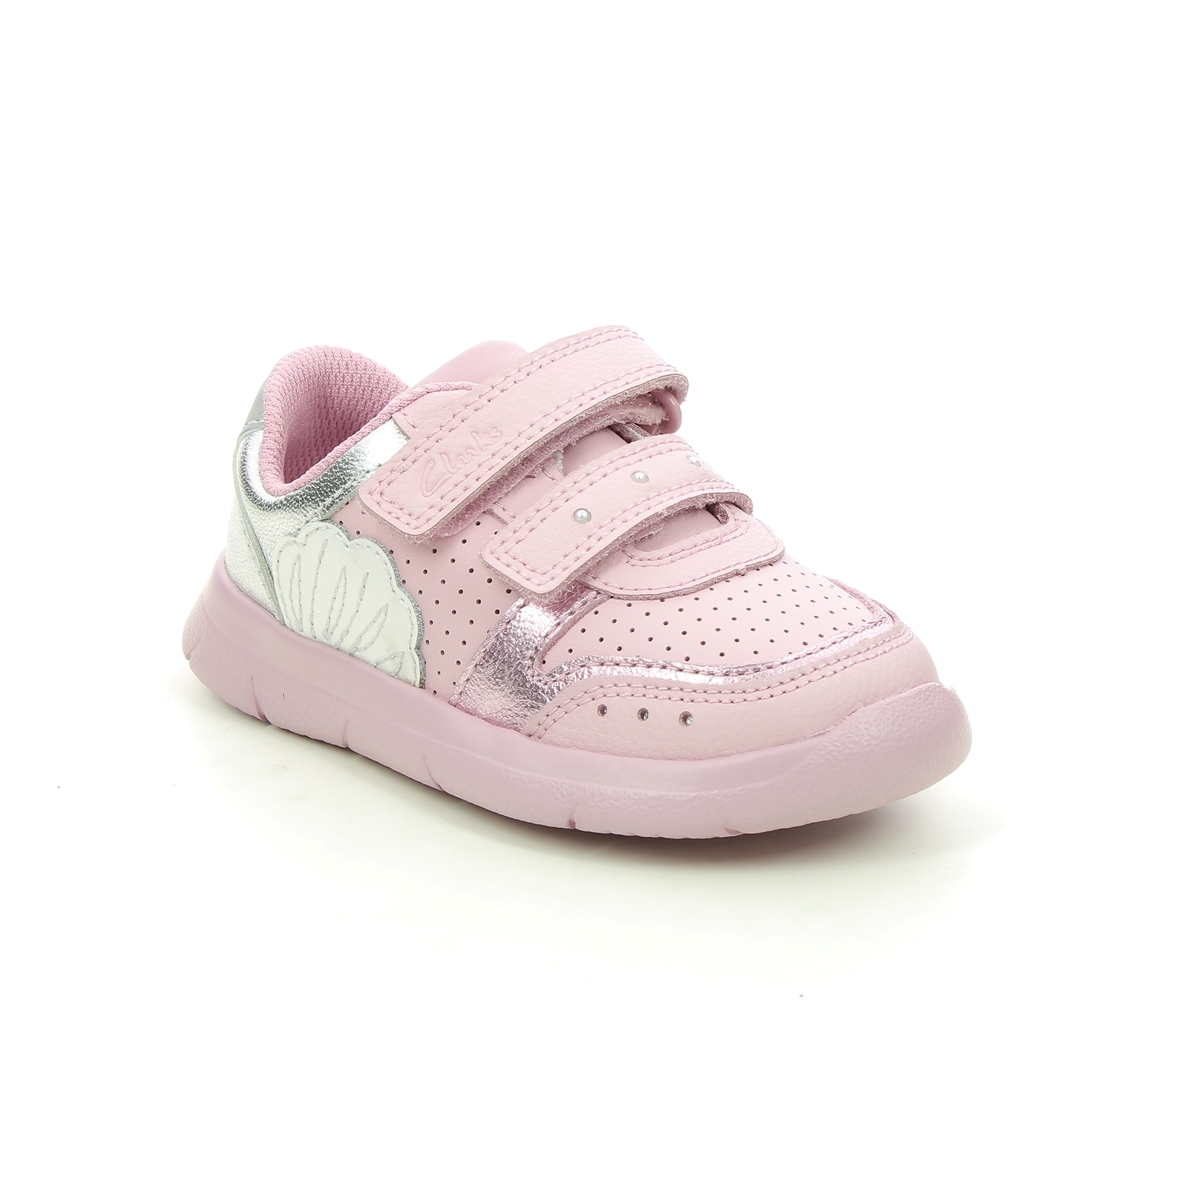 Clarks Ath Shell T Pink Leather Kids Toddler Girls Trainers 588097G In Size 4.5 In Plain Pink Leather G Width Fitting For kids